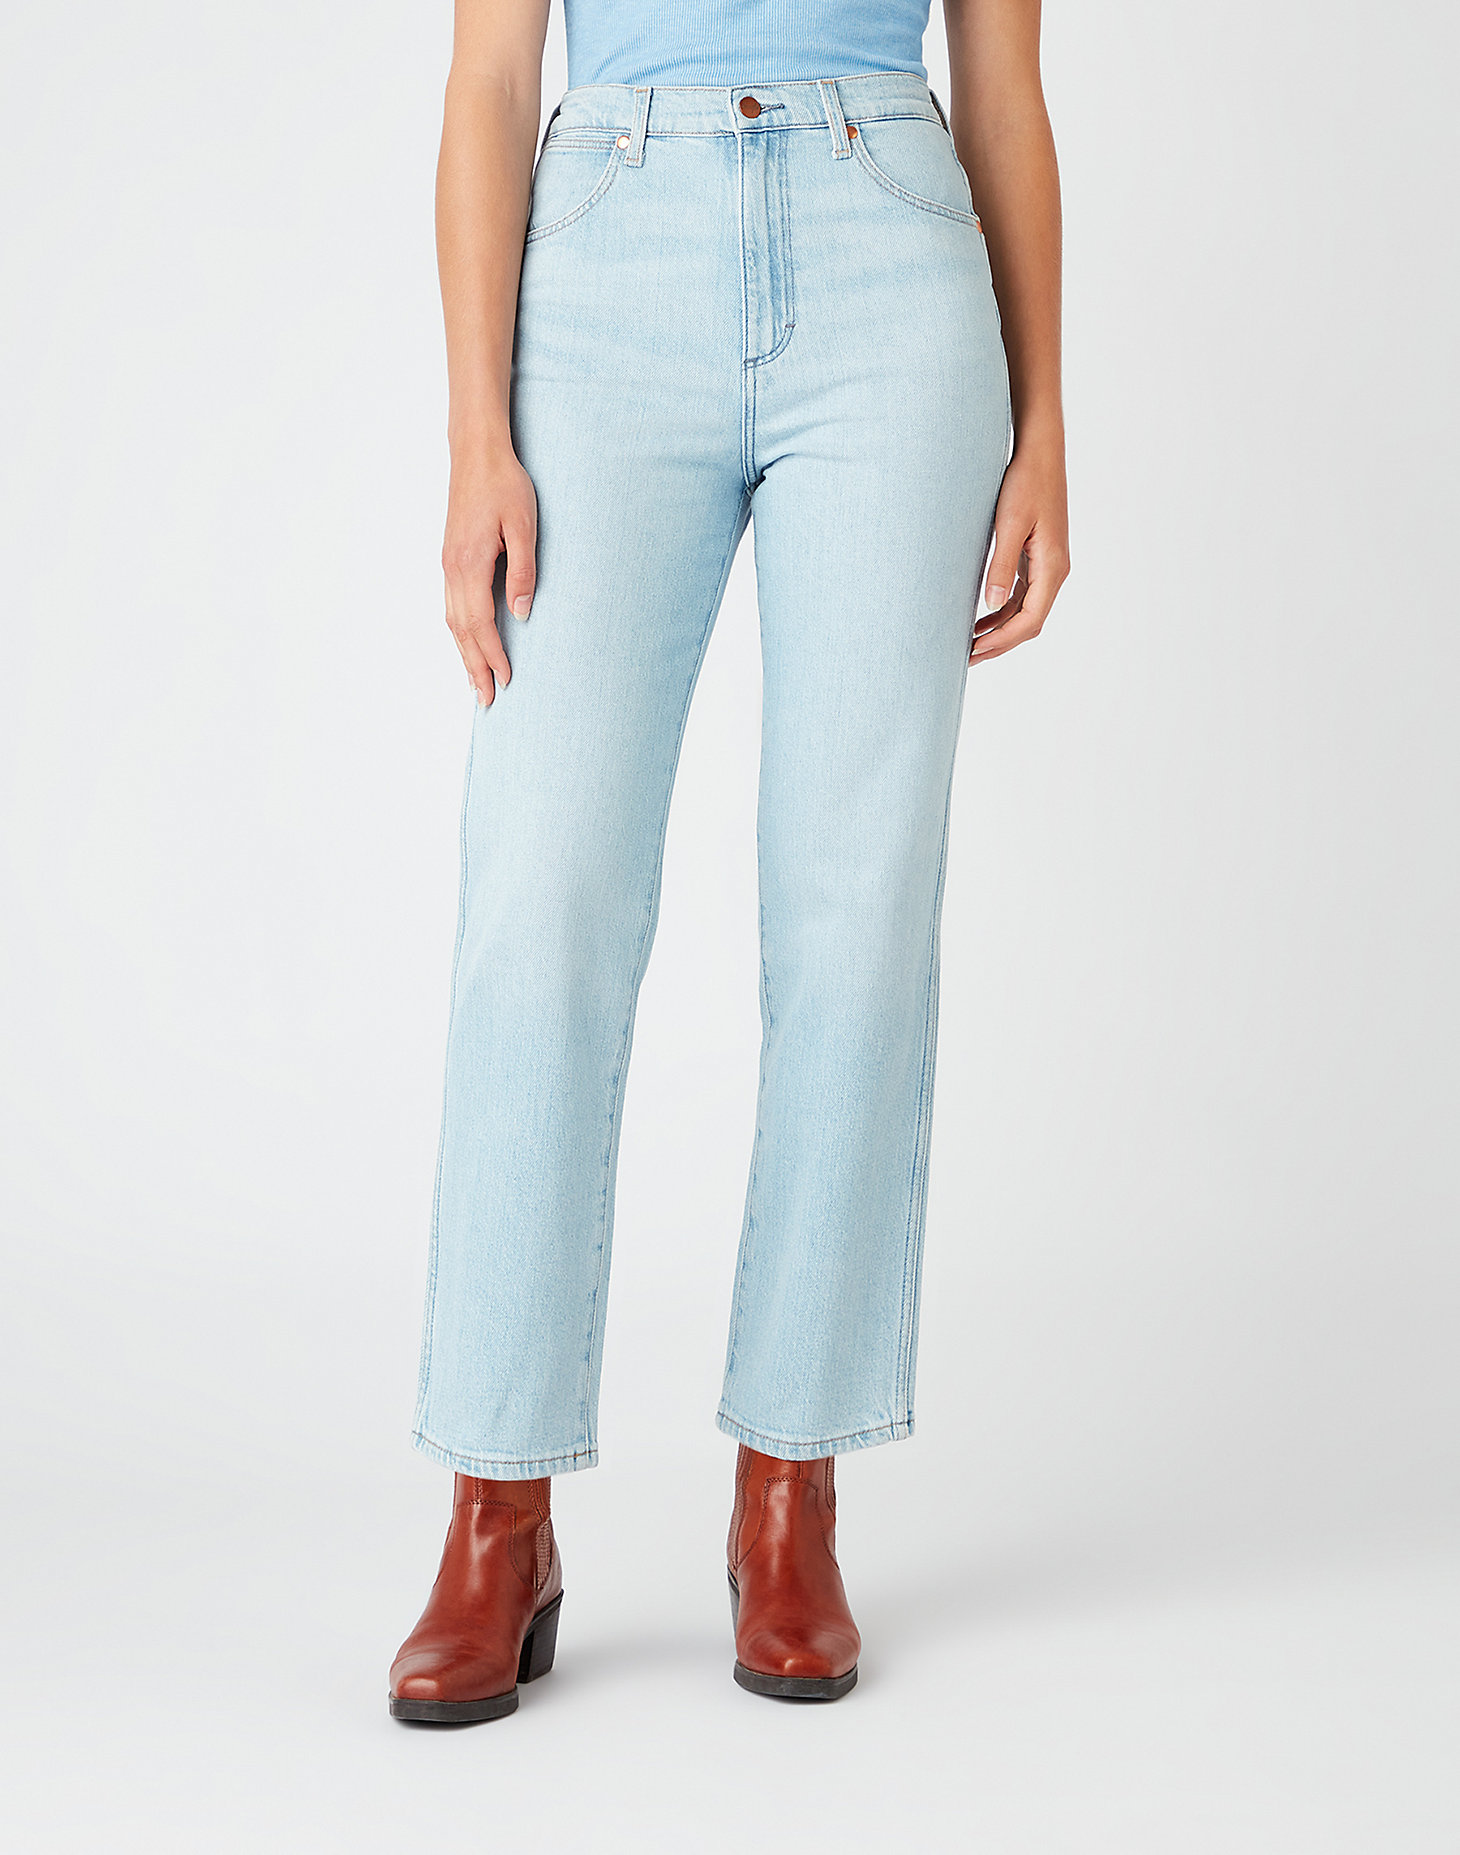 Wild West Jeans in Bright Cloud main view